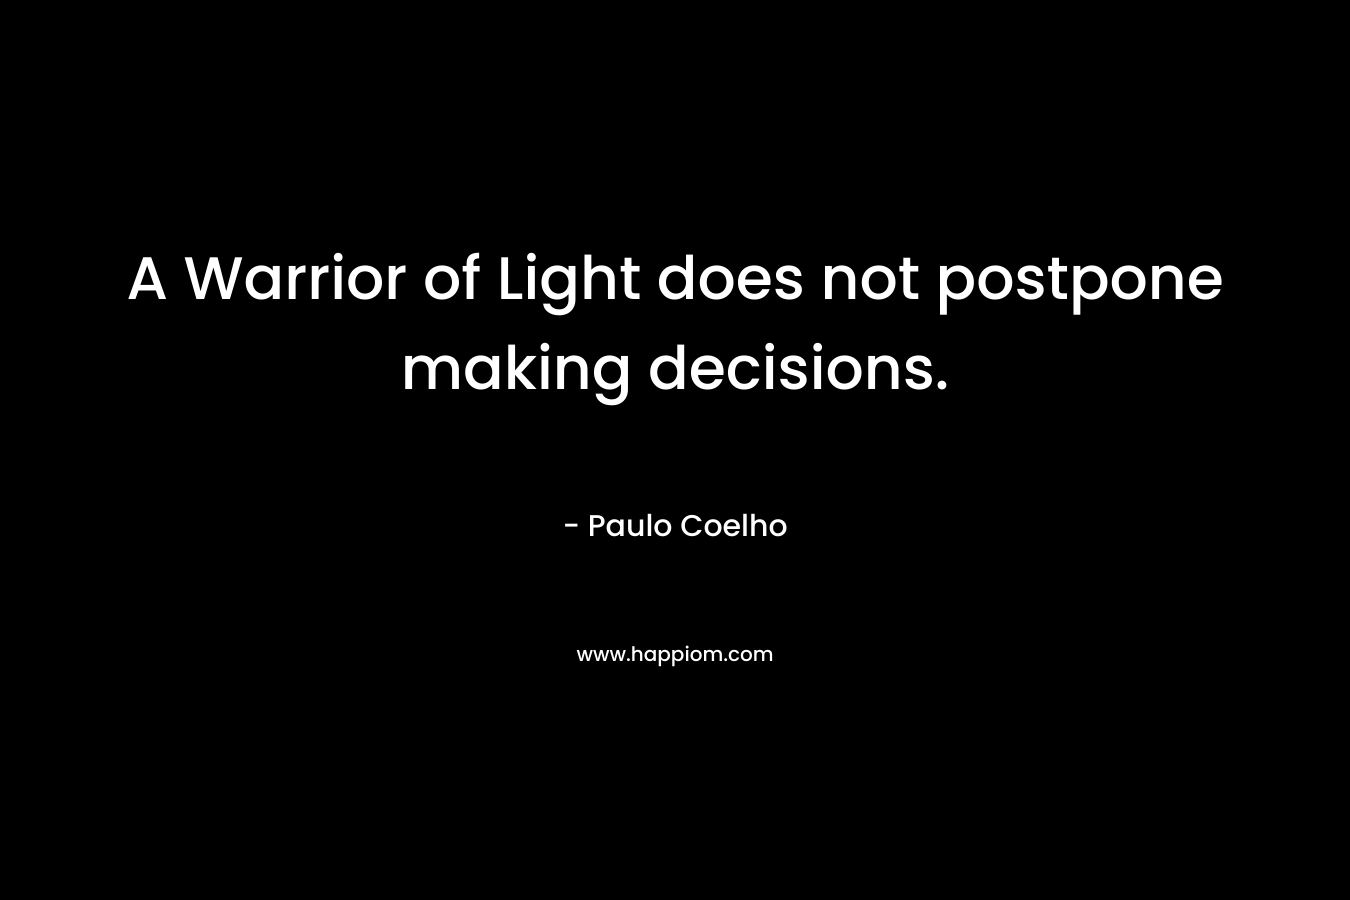 A Warrior of Light does not postpone making decisions. – Paulo Coelho